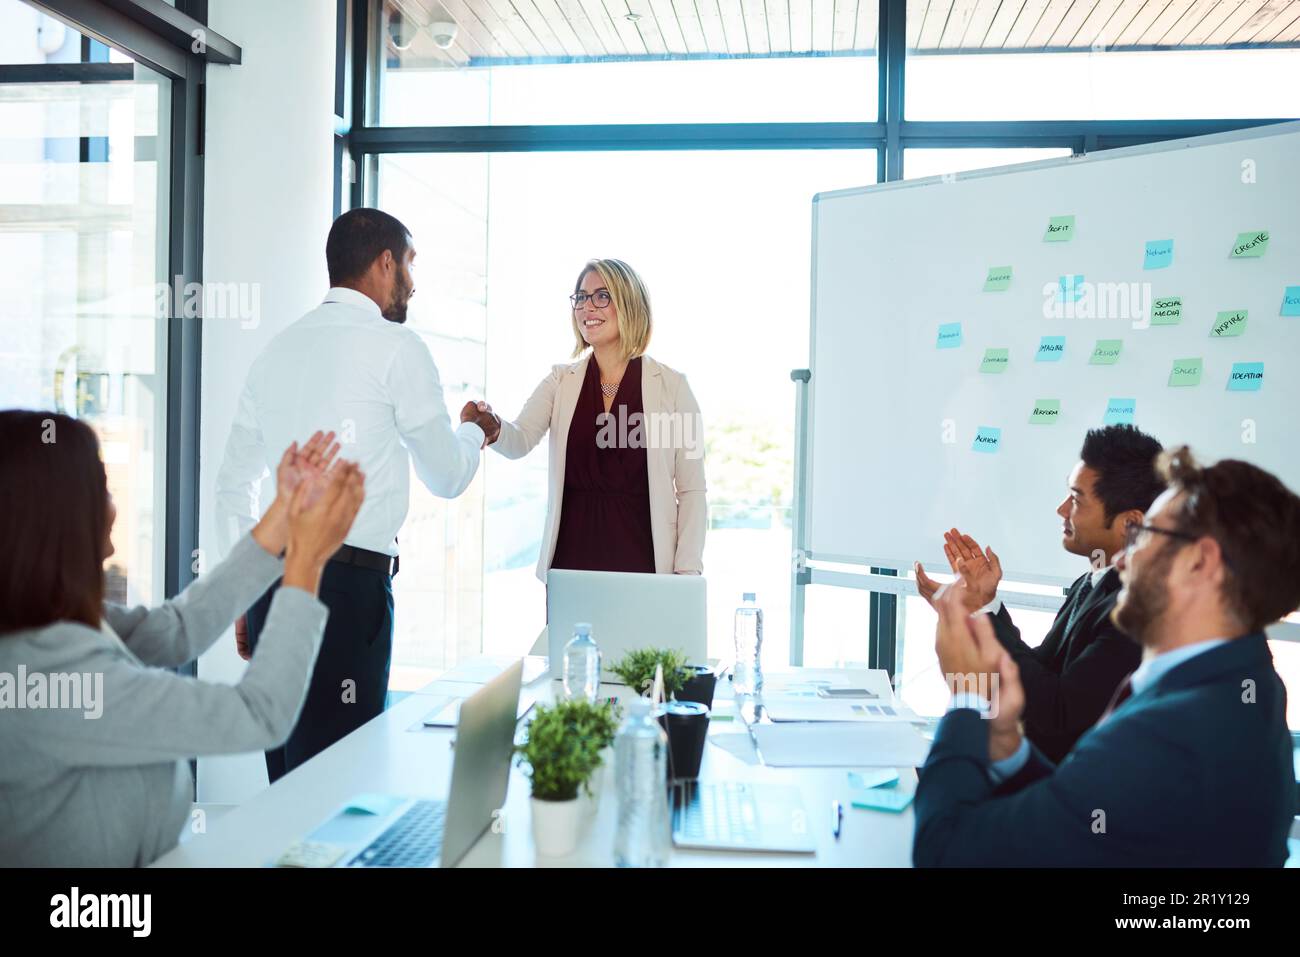 Professional, handshake and agreement in a meeting to congratulate for success and an opportunity. Presentation, applause and business people with Stock Photo